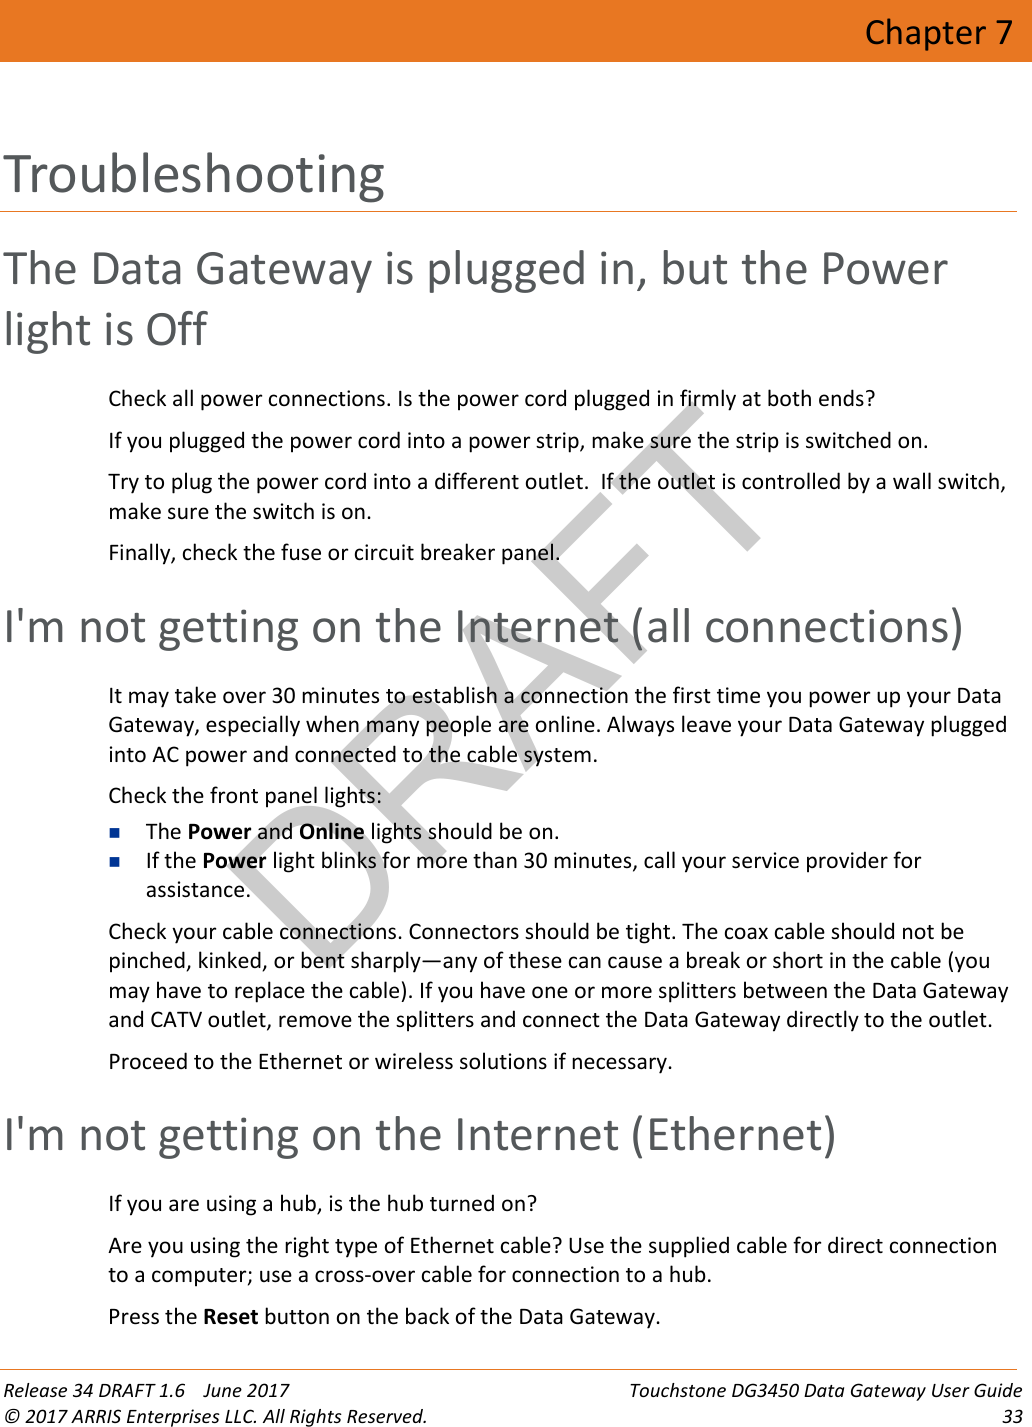 DRAFT Release 34 DRAFT 1.6    June 2017 Touchstone DG3450 Data Gateway User Guide © 2017 ARRIS Enterprises LLC. All Rights Reserved. 33  Chapter 7 Troubleshooting The Data Gateway is plugged in, but the Power light is Off Check all power connections. Is the power cord plugged in firmly at both ends? If you plugged the power cord into a power strip, make sure the strip is switched on. Try to plug the power cord into a different outlet.  If the outlet is controlled by a wall switch, make sure the switch is on. Finally, check the fuse or circuit breaker panel.   I&apos;m not getting on the Internet (all connections) It may take over 30 minutes to establish a connection the first time you power up your Data Gateway, especially when many people are online. Always leave your Data Gateway plugged into AC power and connected to the cable system. Check the front panel lights:  The Power and Online lights should be on.  If the Power light blinks for more than 30 minutes, call your service provider for assistance. Check your cable connections. Connectors should be tight. The coax cable should not be pinched, kinked, or bent sharply—any of these can cause a break or short in the cable (you may have to replace the cable). If you have one or more splitters between the Data Gateway and CATV outlet, remove the splitters and connect the Data Gateway directly to the outlet. Proceed to the Ethernet or wireless solutions if necessary.   I&apos;m not getting on the Internet (Ethernet) If you are using a hub, is the hub turned on? Are you using the right type of Ethernet cable? Use the supplied cable for direct connection to a computer; use a cross-over cable for connection to a hub. Press the Reset button on the back of the Data Gateway. 